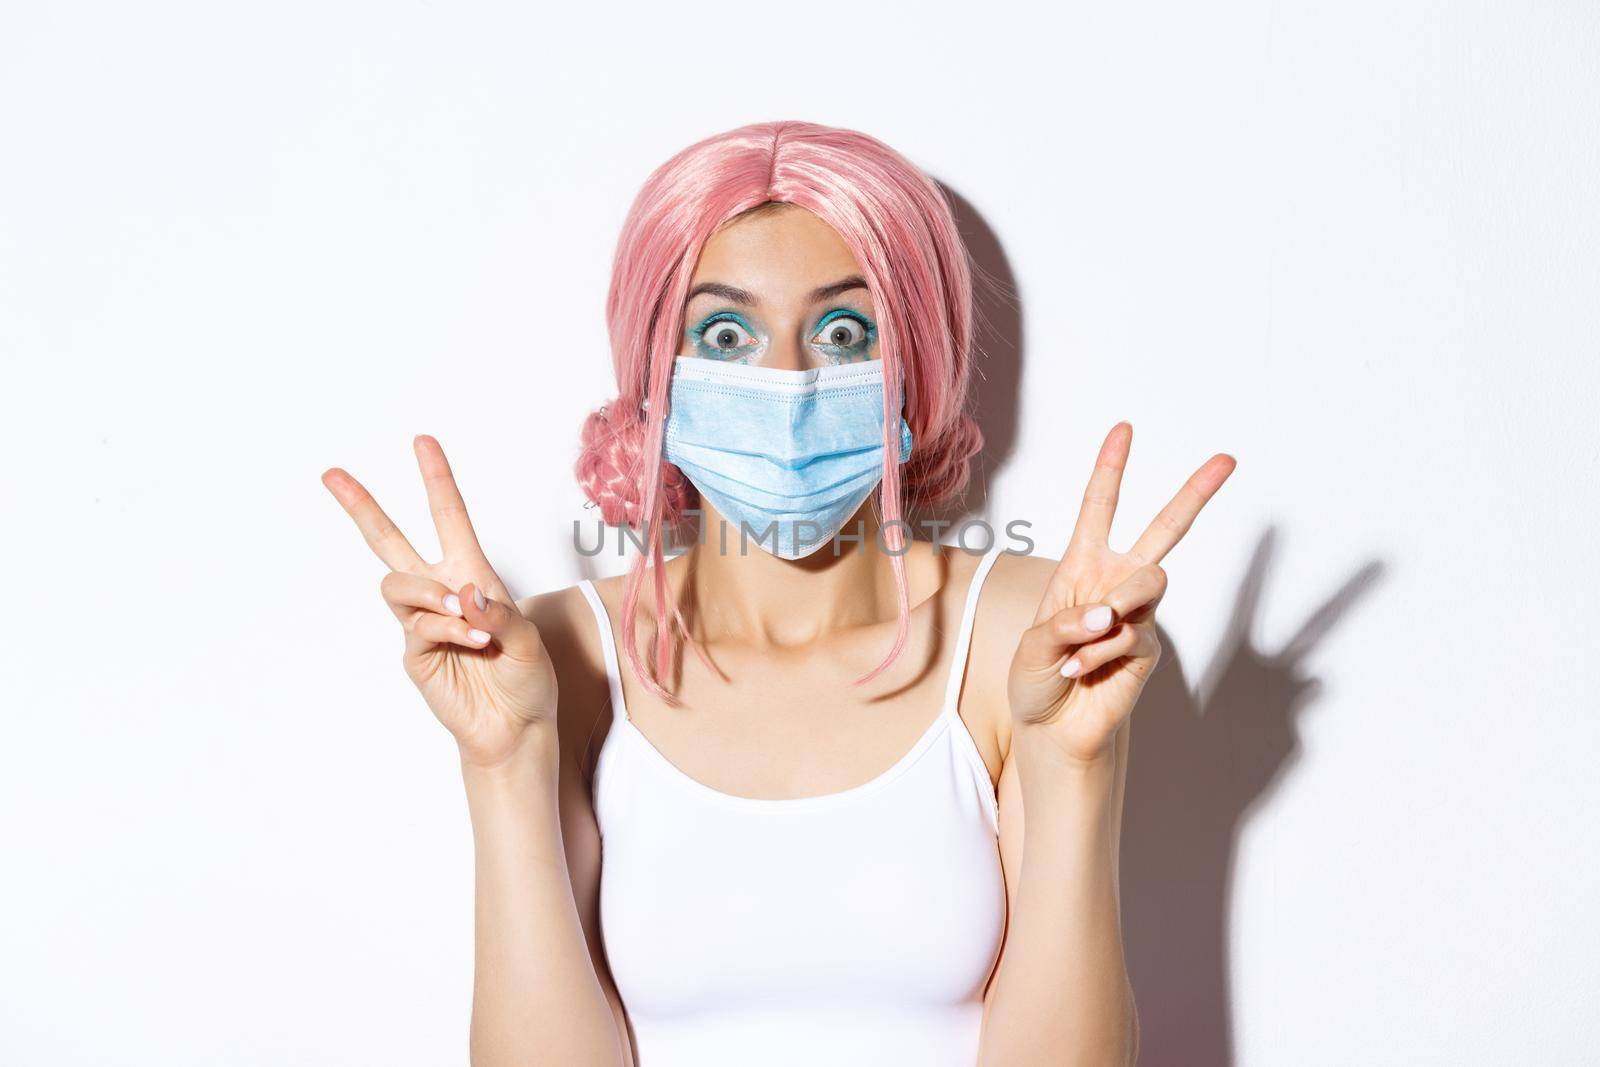 Coronavirus, social distancing and lifestyle concept. Close-up of pretty party girl in medical mask and pink wig, showing peace signs looking excited, white background.